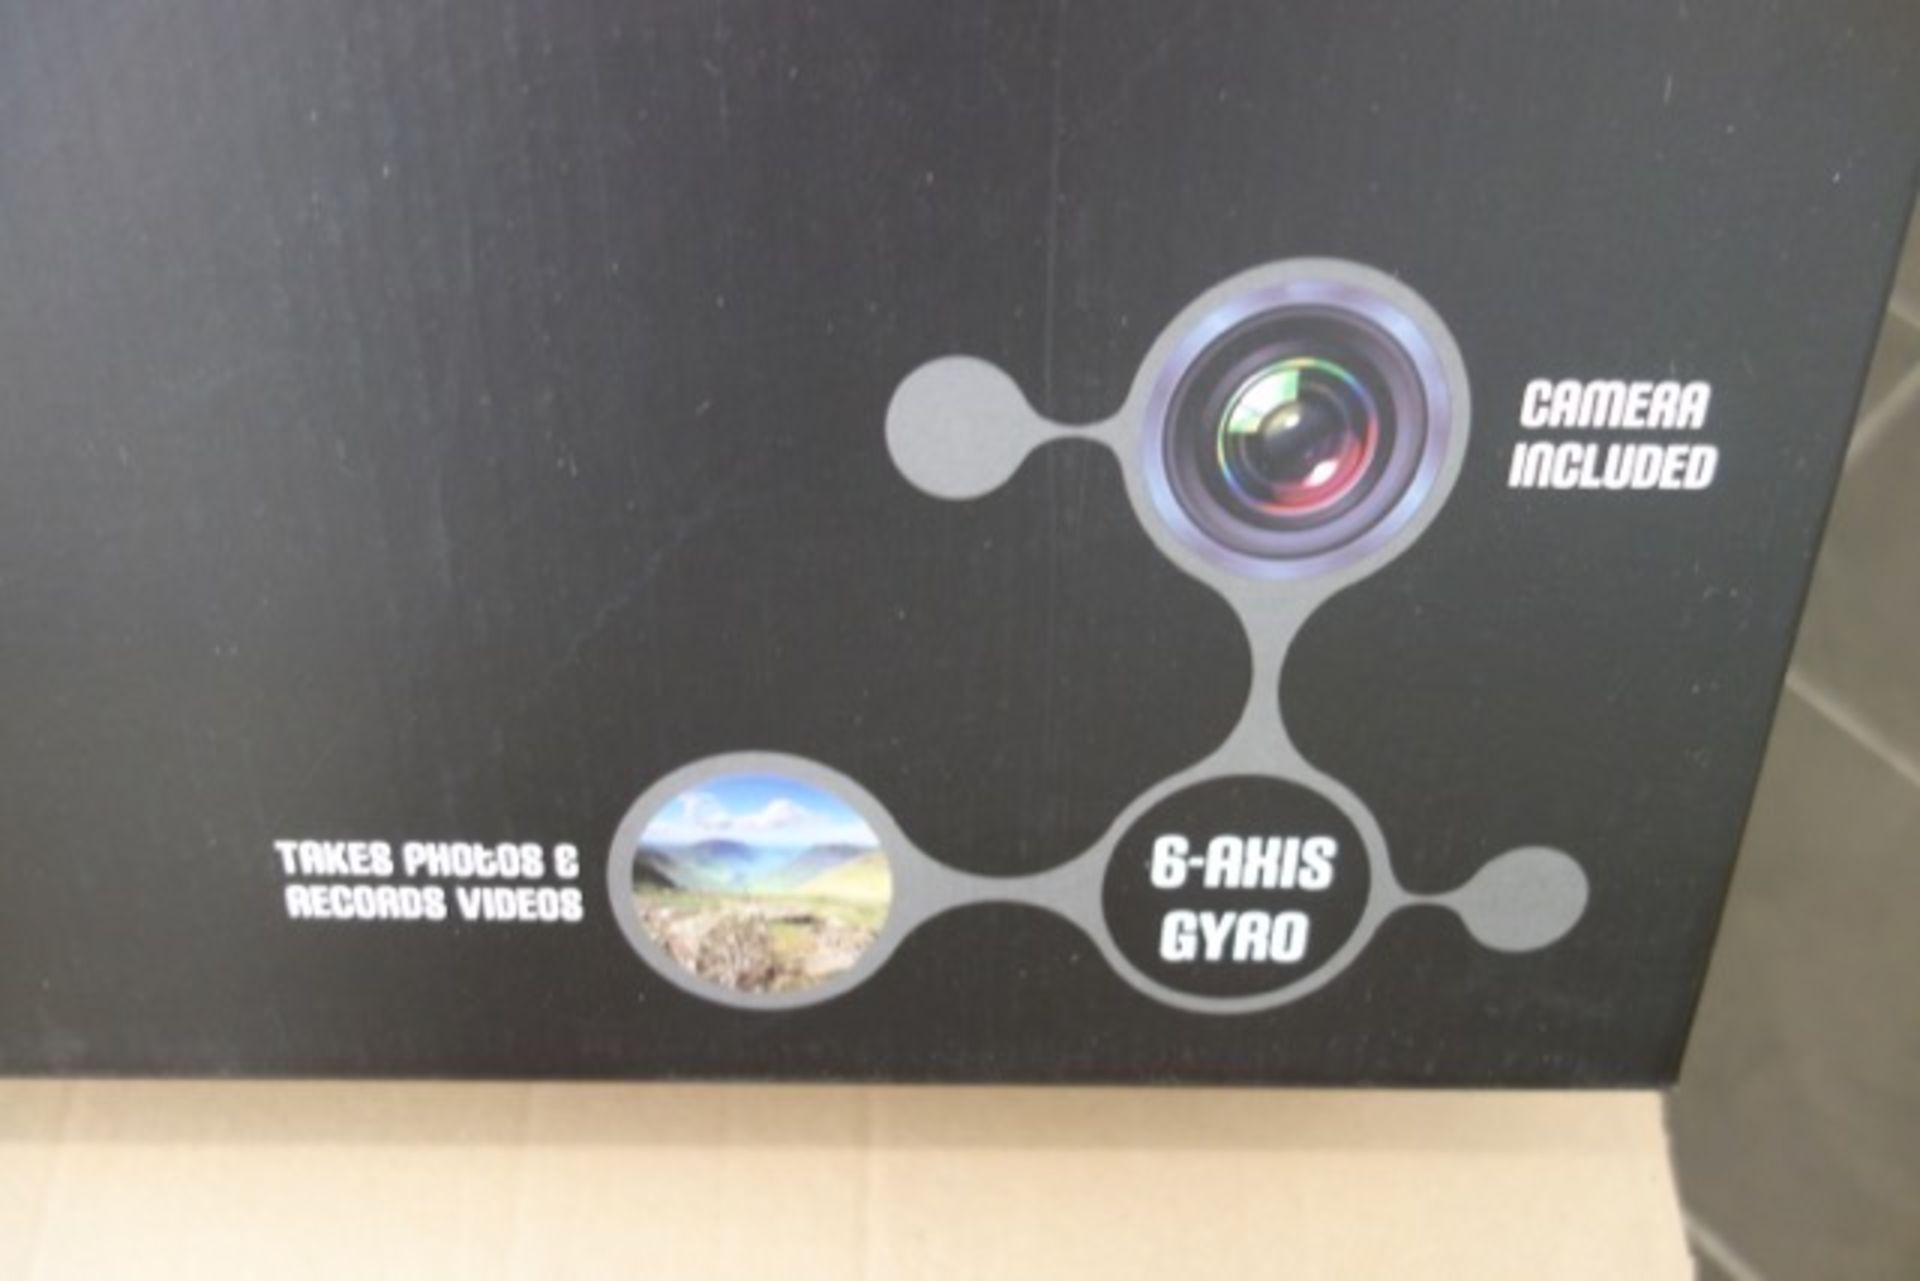 1 x Brand New Global Gizmos 2.4GHZ Remote Control Drone. Takes images & records videos - Image 2 of 4